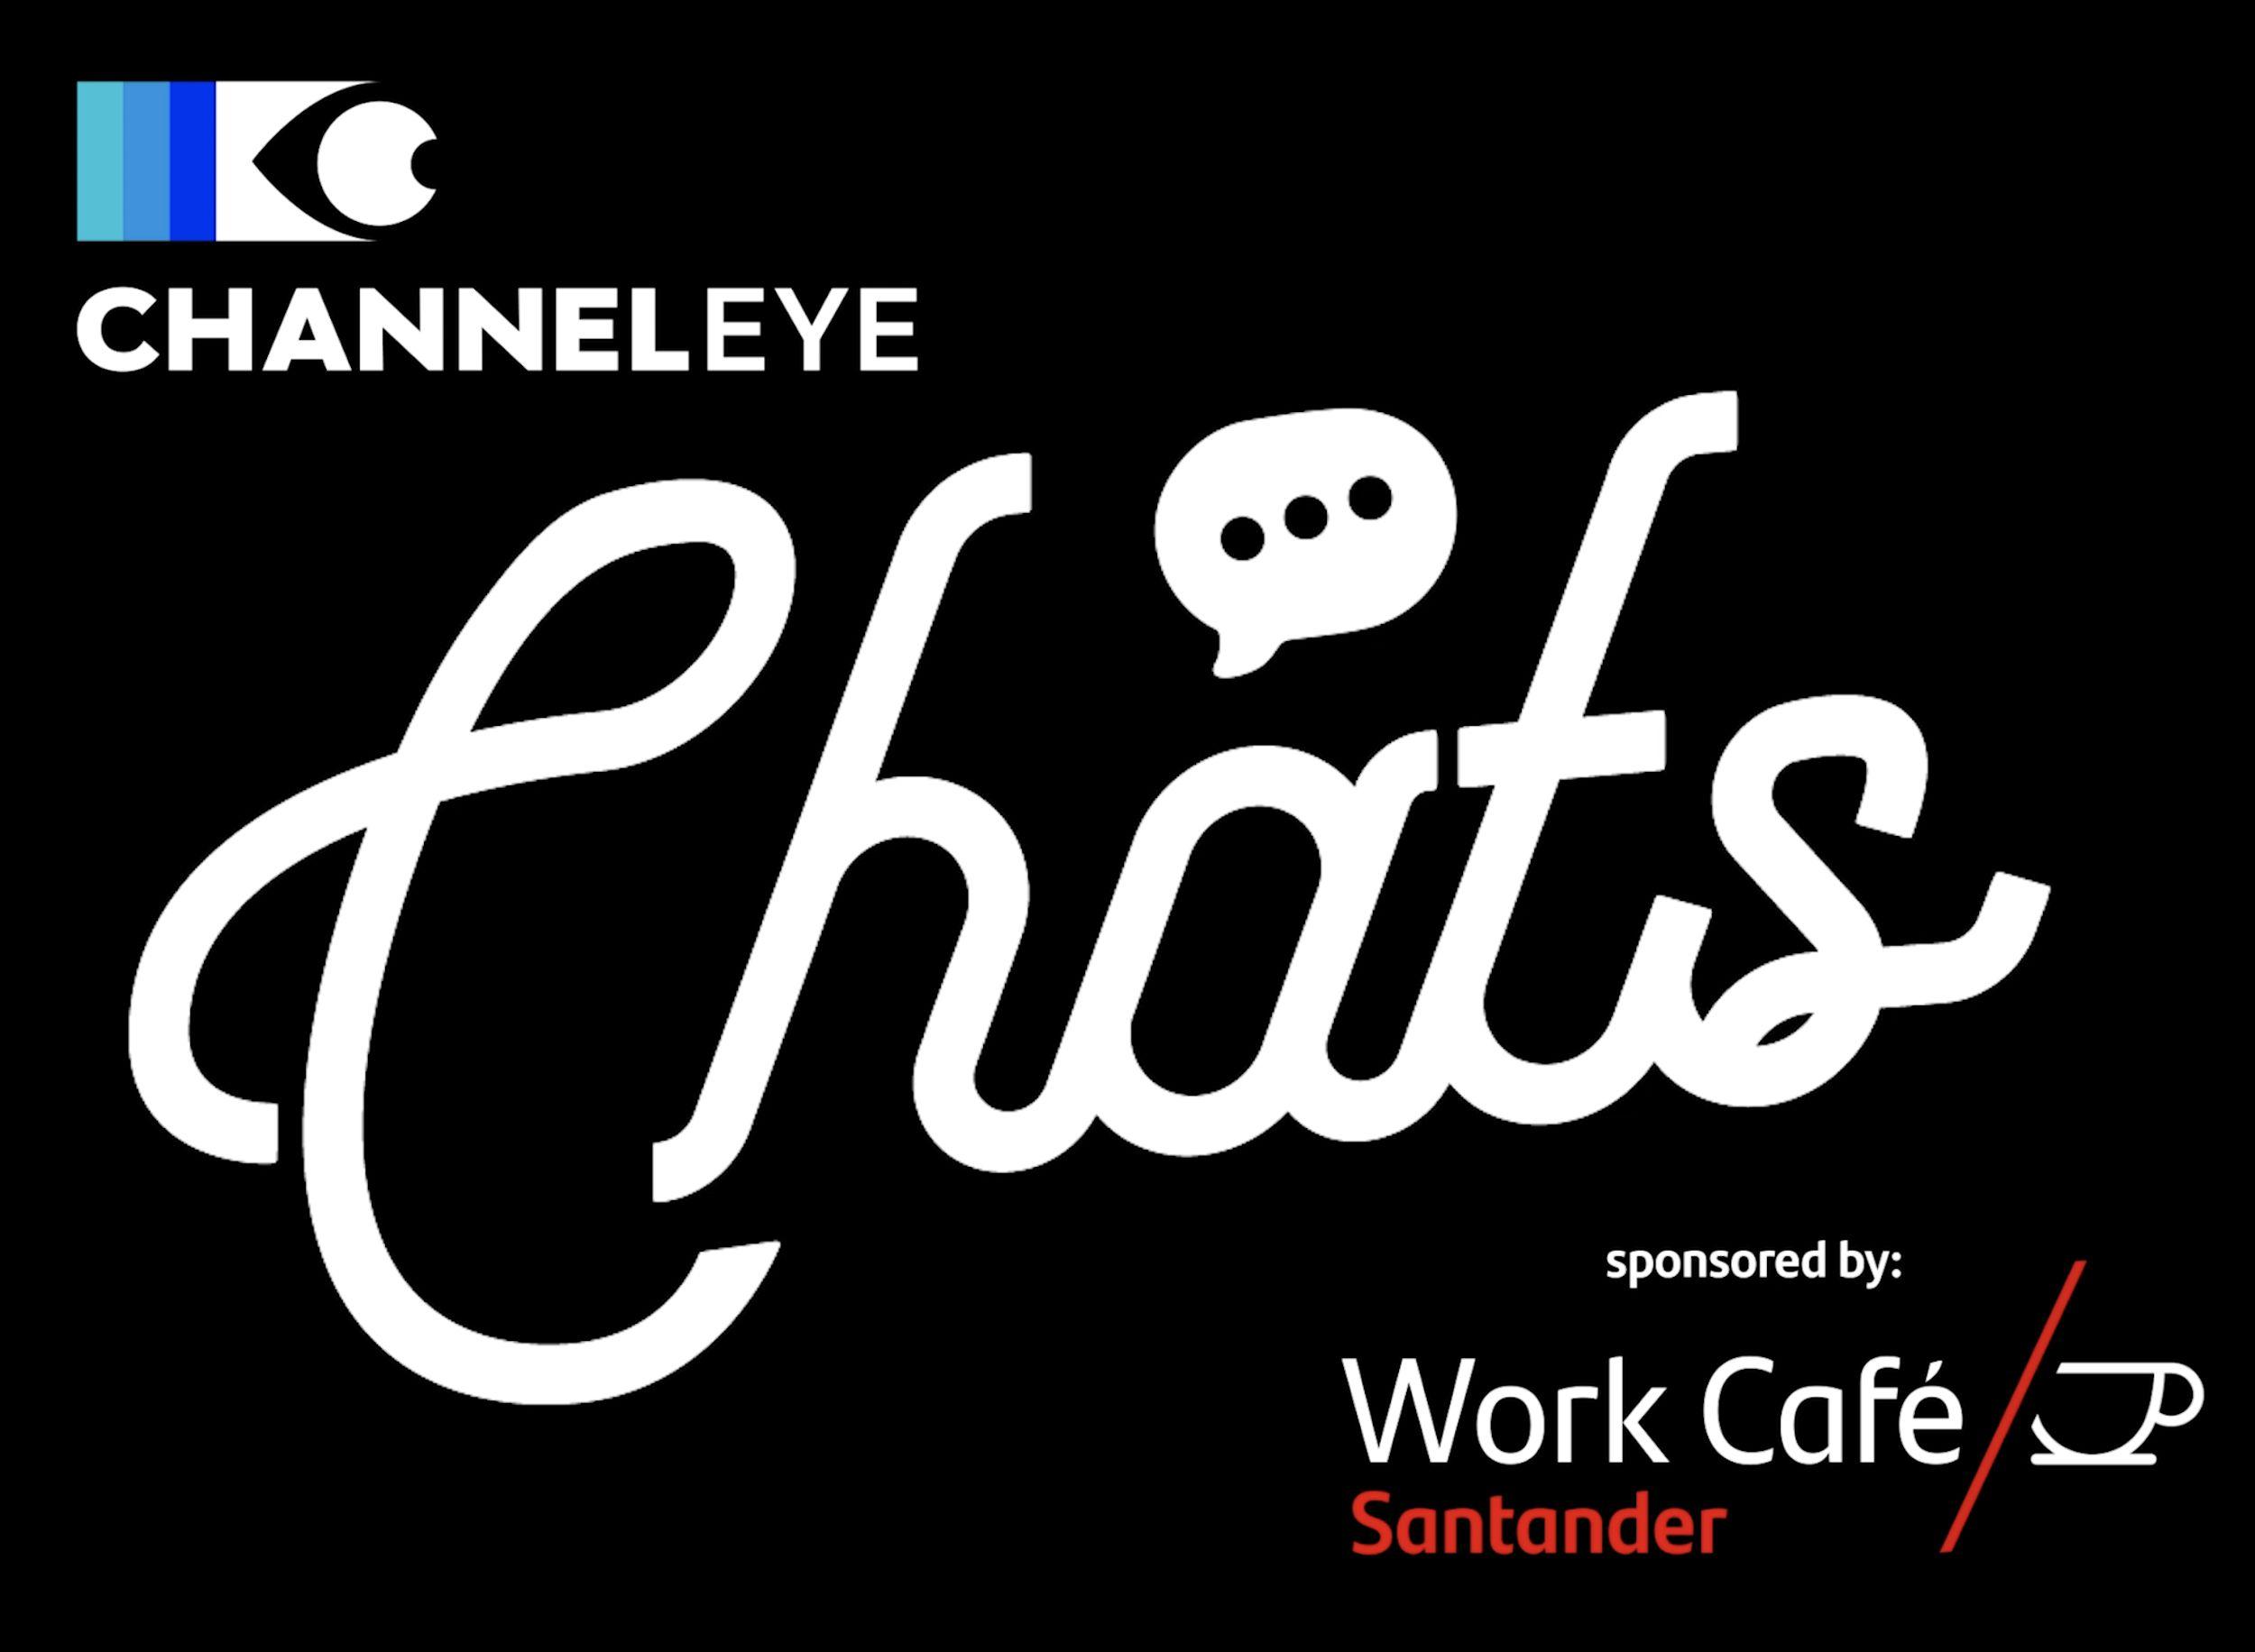 Channel Eye Chats sponsored by Santander Work Cafe